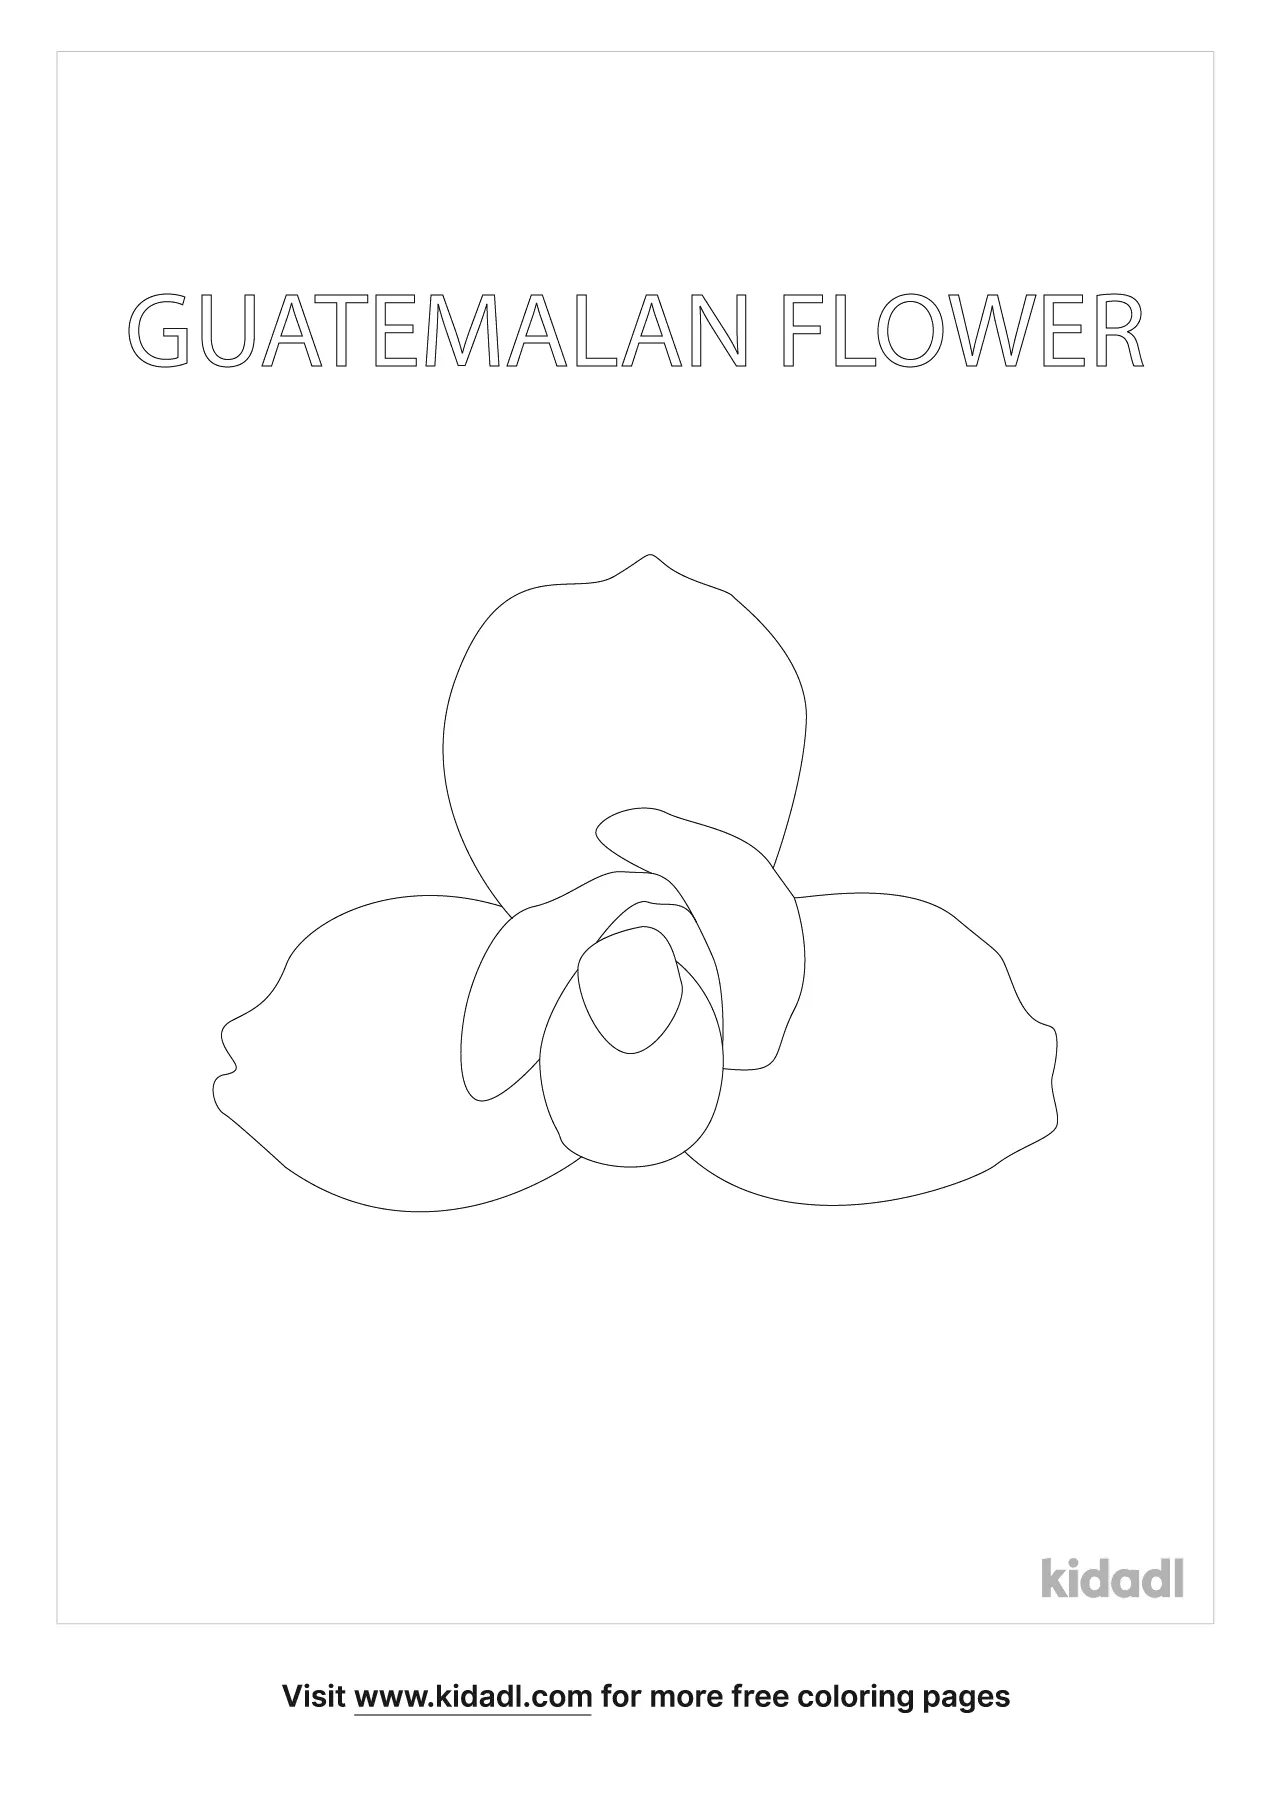 Guatemalan Flower Coloring Page | Free Flowers Coloring Page | Kidadl